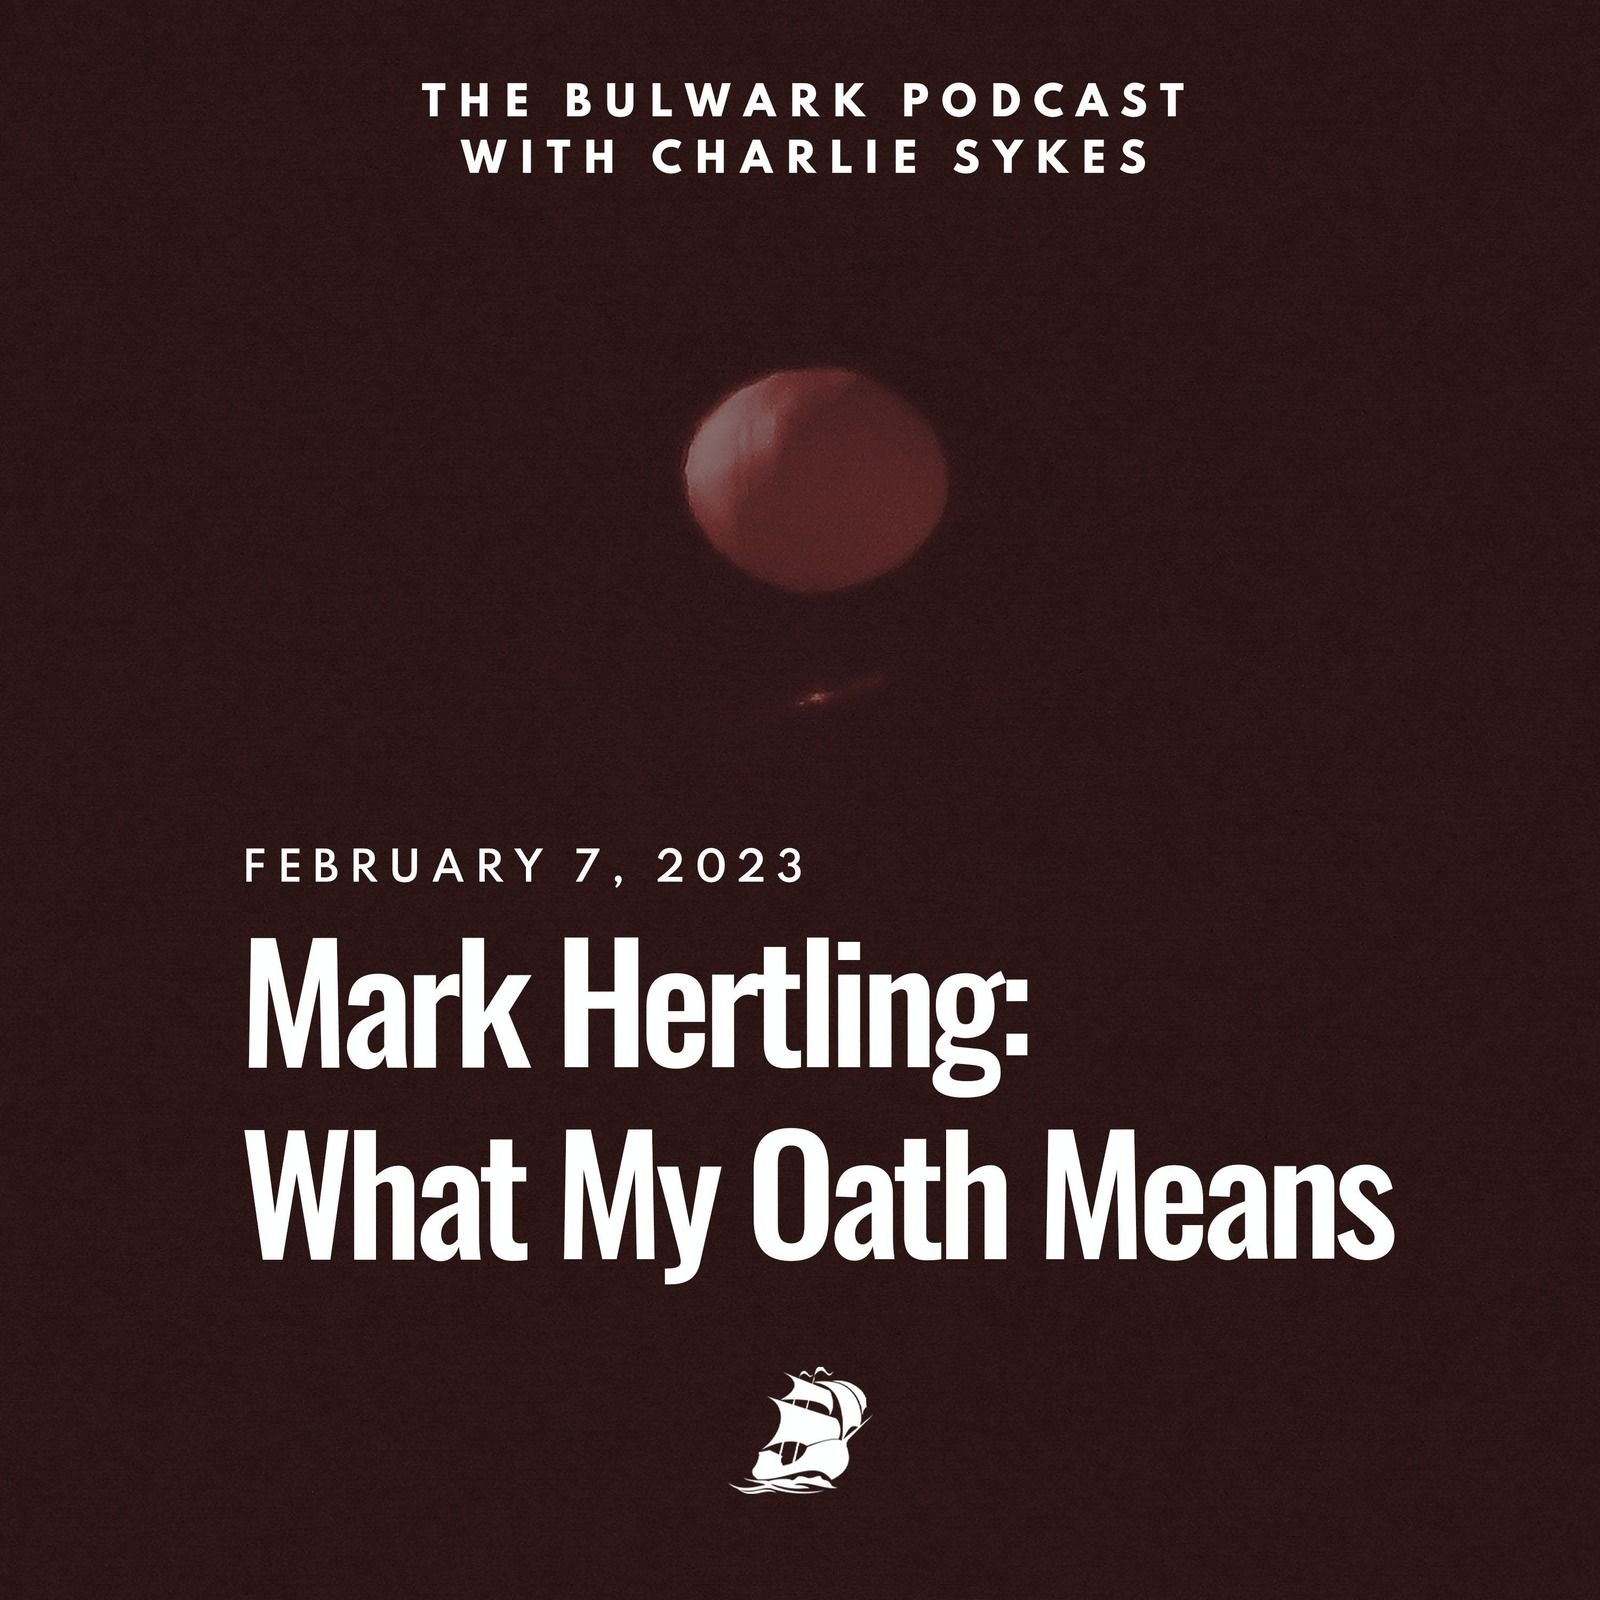 Mark Hertling: What My Oath Means